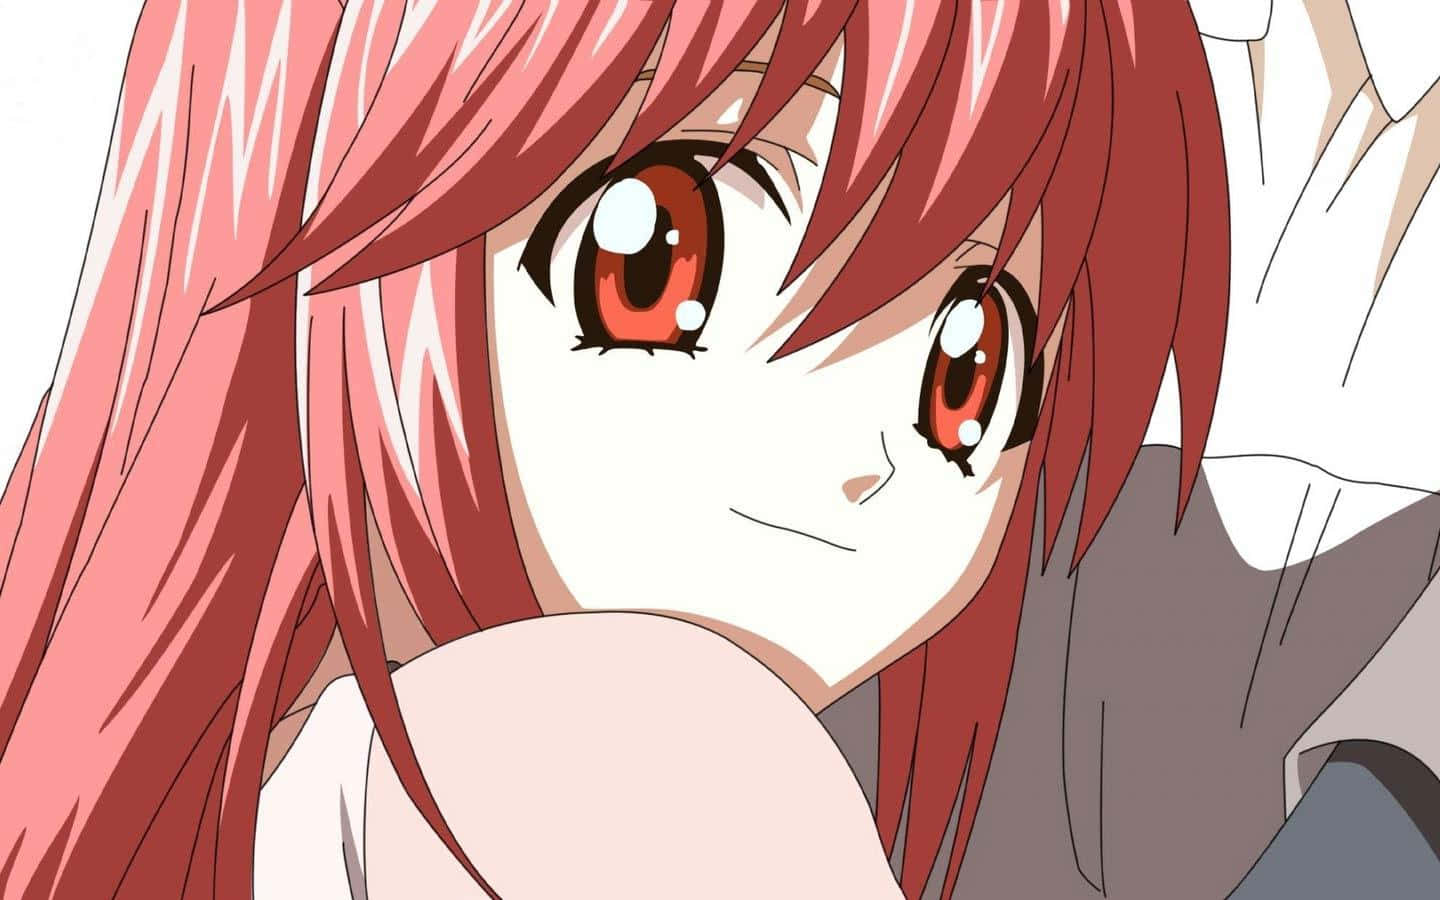 "The terrifying Diclonius are unleashed in the world of Elfen Lied"